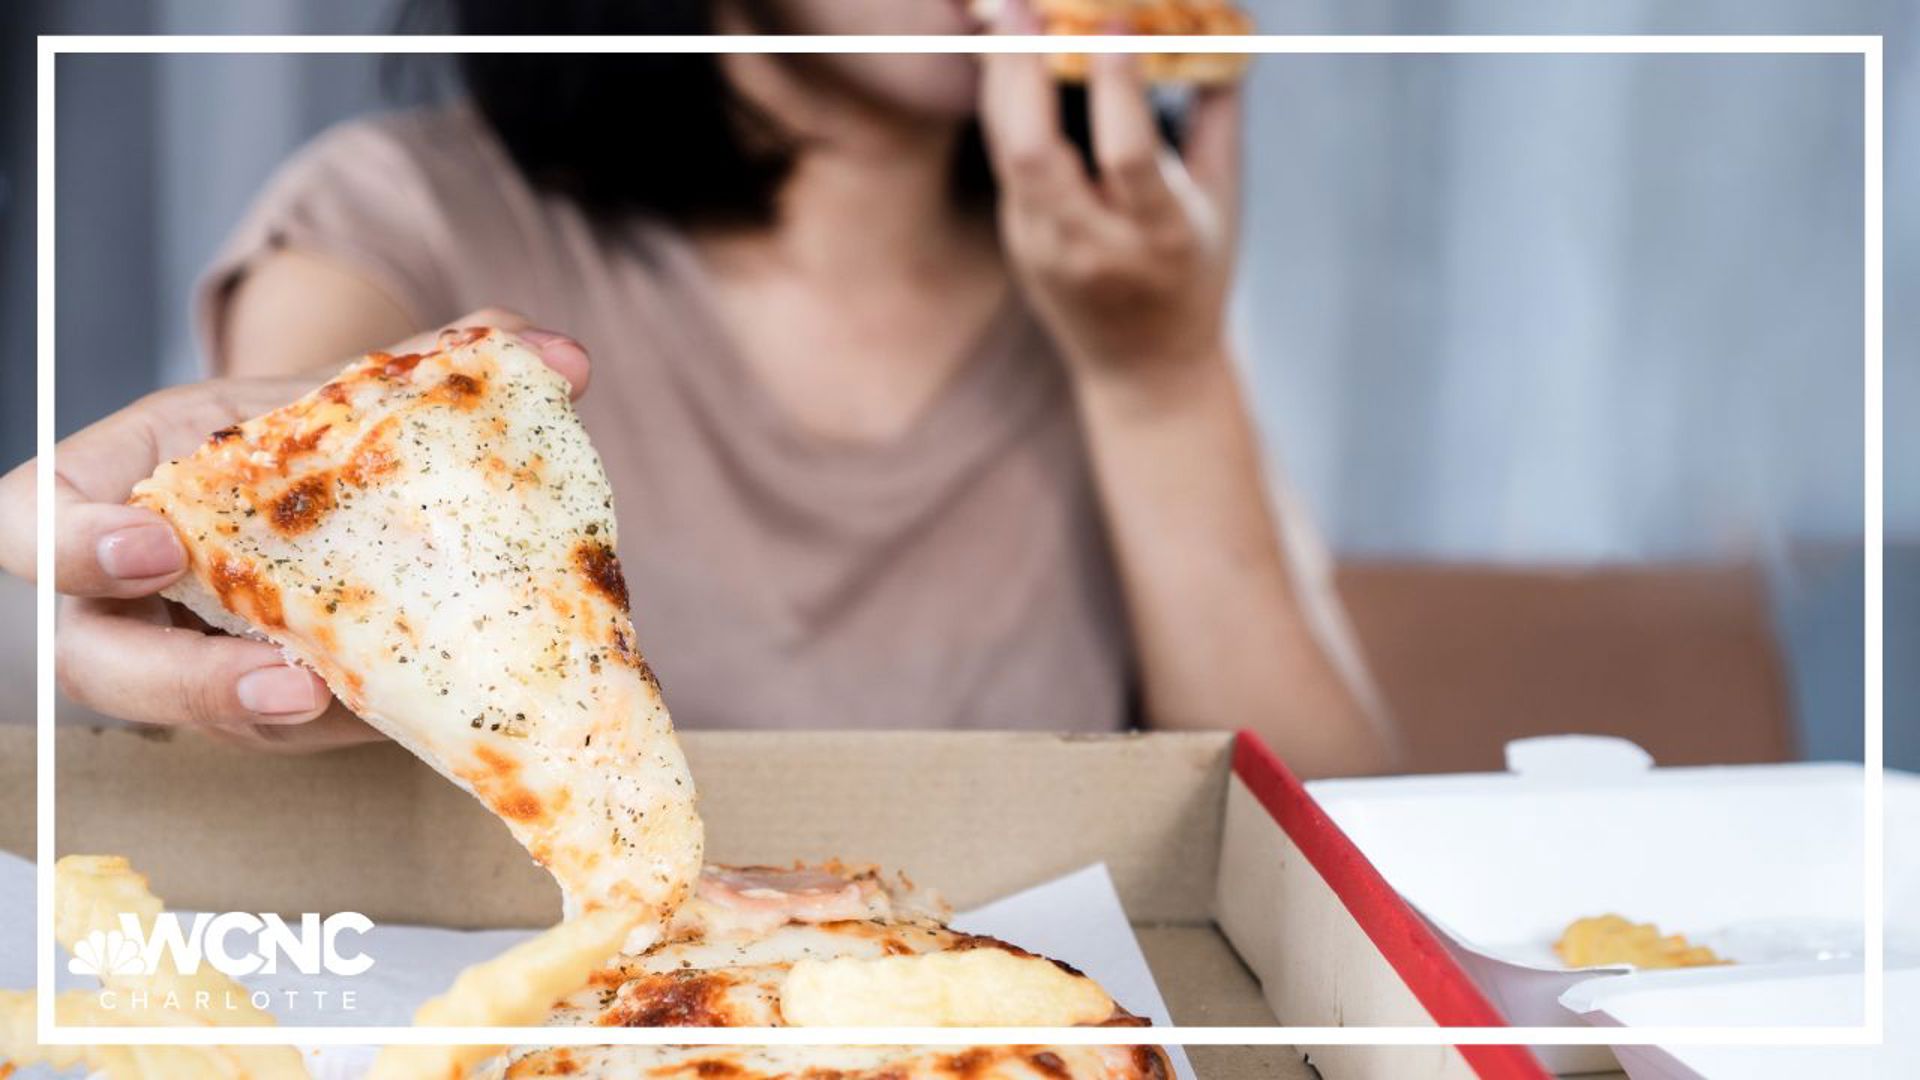 Psychologists say the real reason many people overeat is because they lack self-control, munching away on junk food while doing other things.